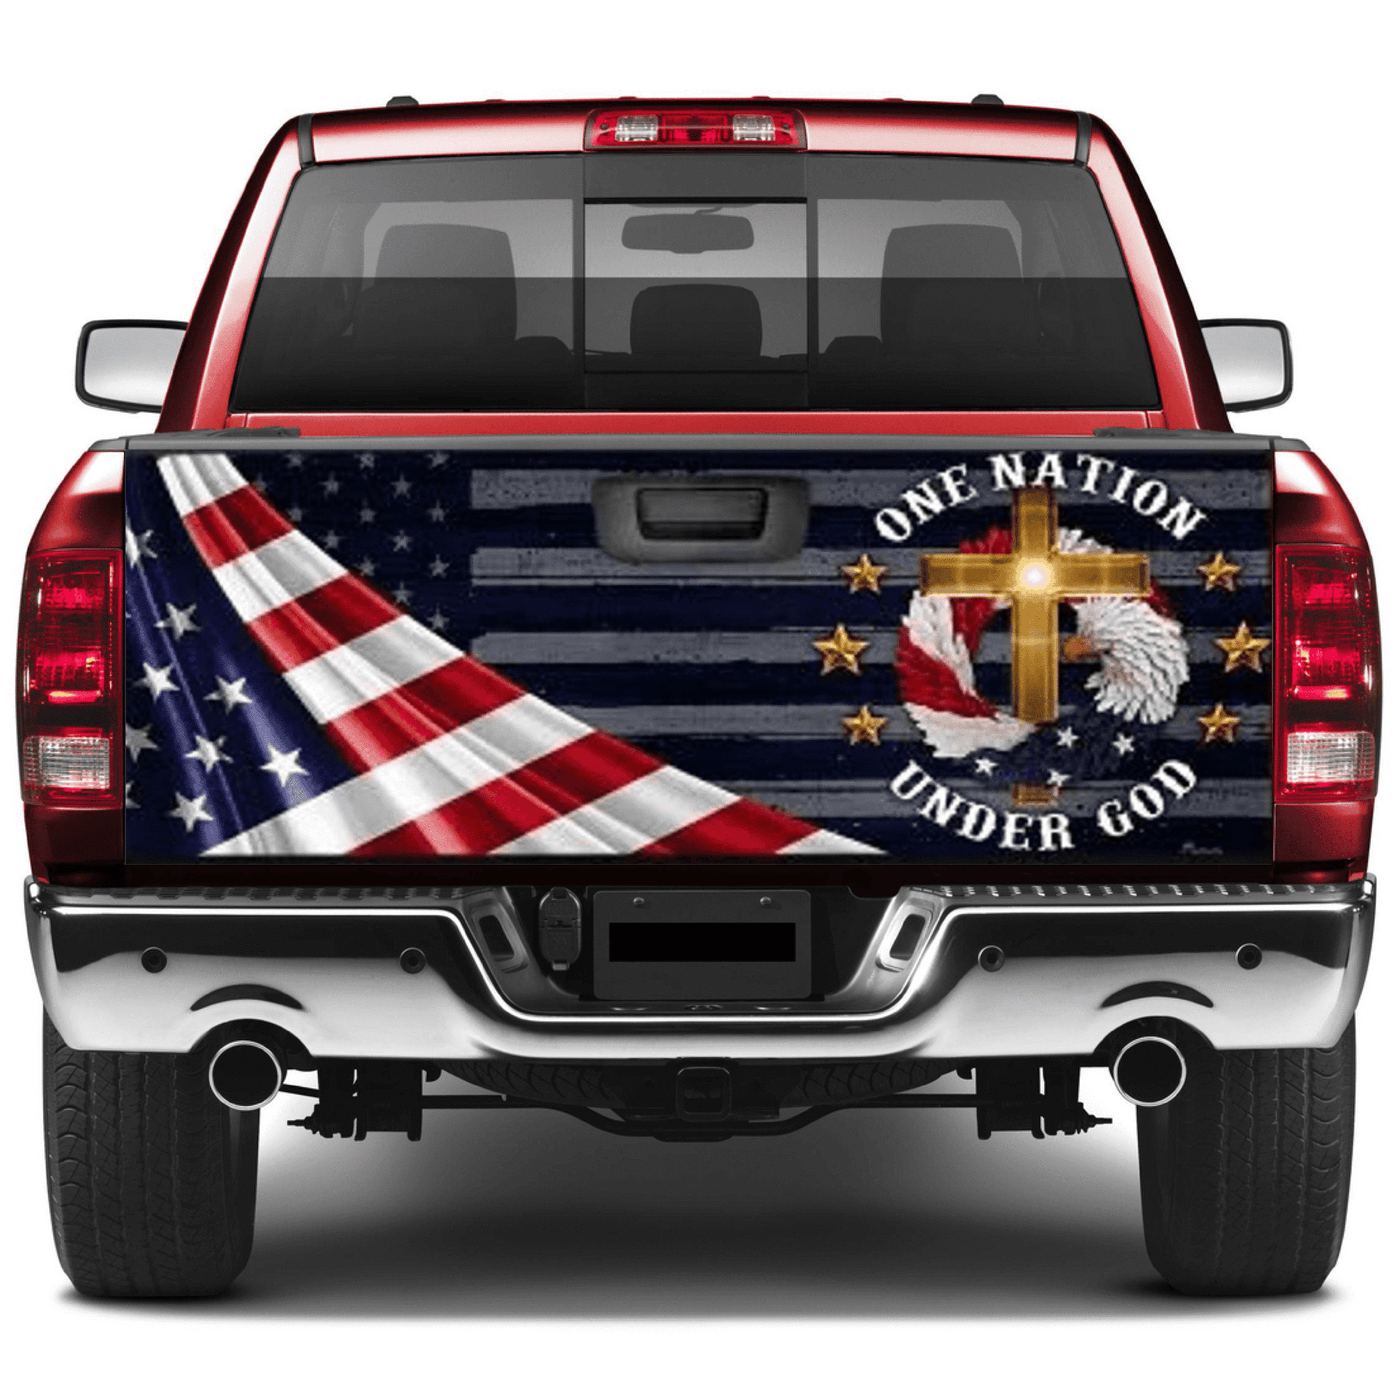 American Flag Tailgate Wrap Decal Truck